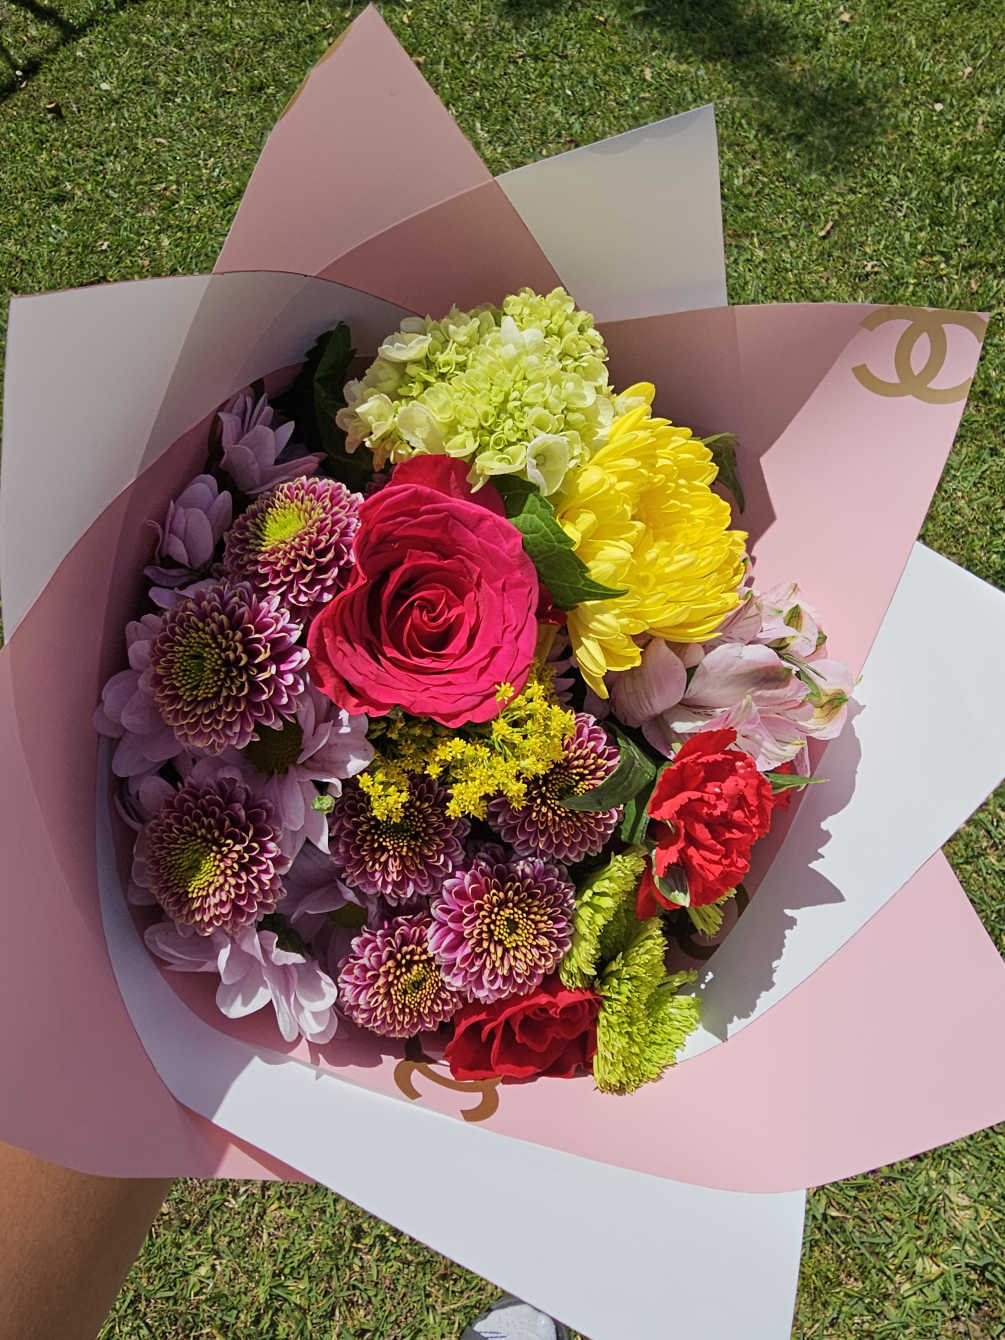 Colorful mix bouquet, wrapped in a luxury wrap. (chanel, gucci or louis